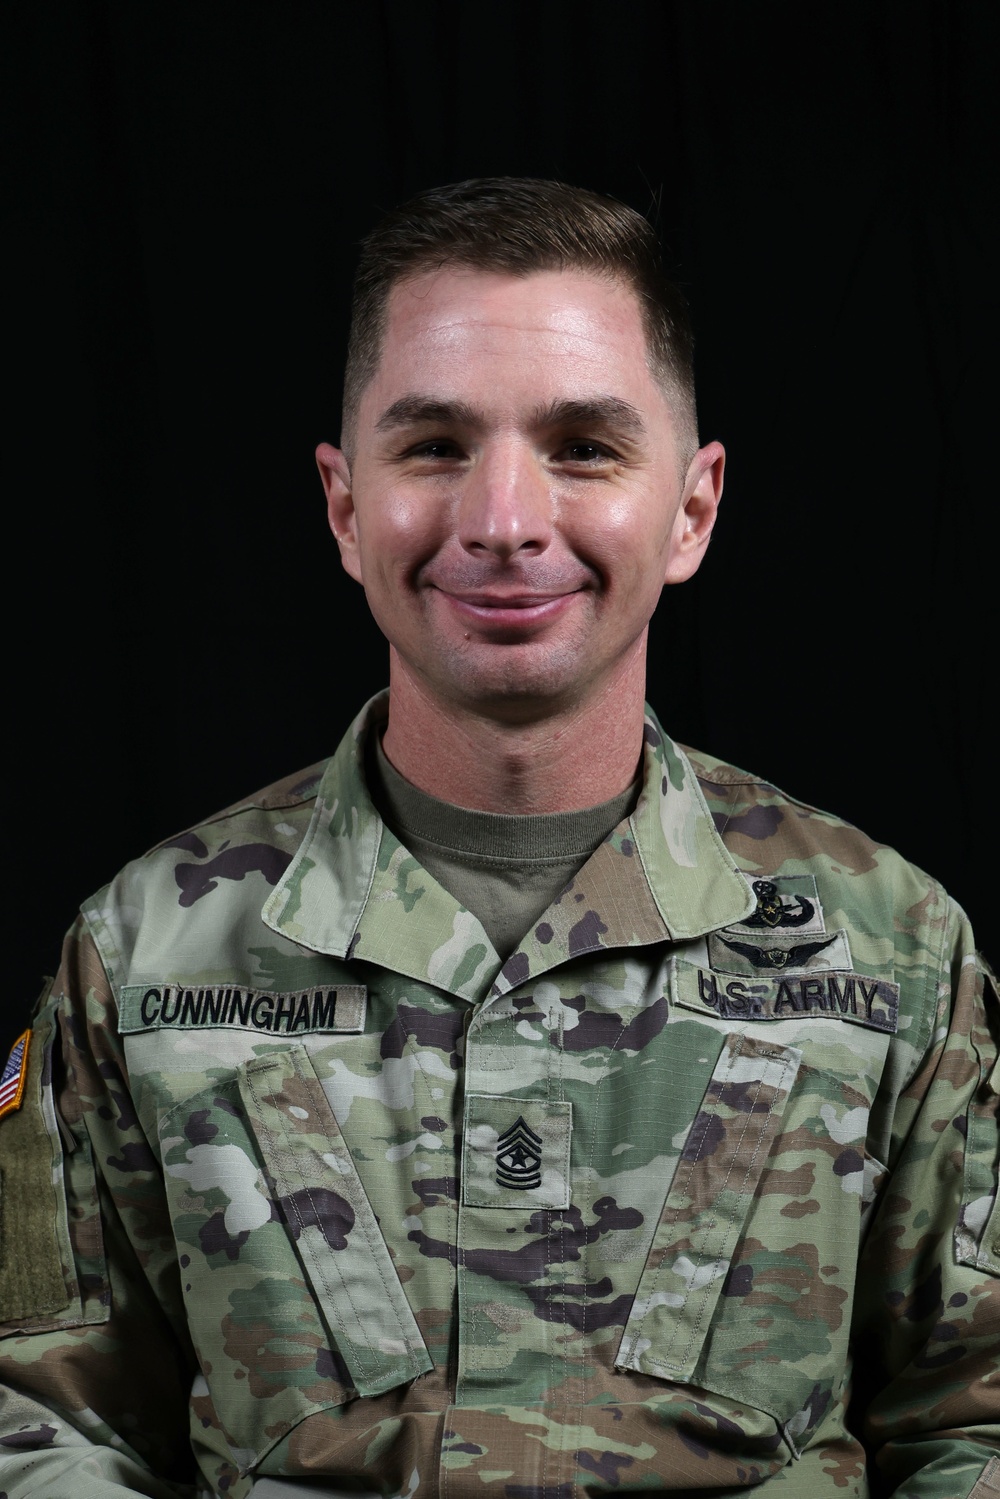 Master Explosive Ordnance Disposal technician selected for command sergeant major